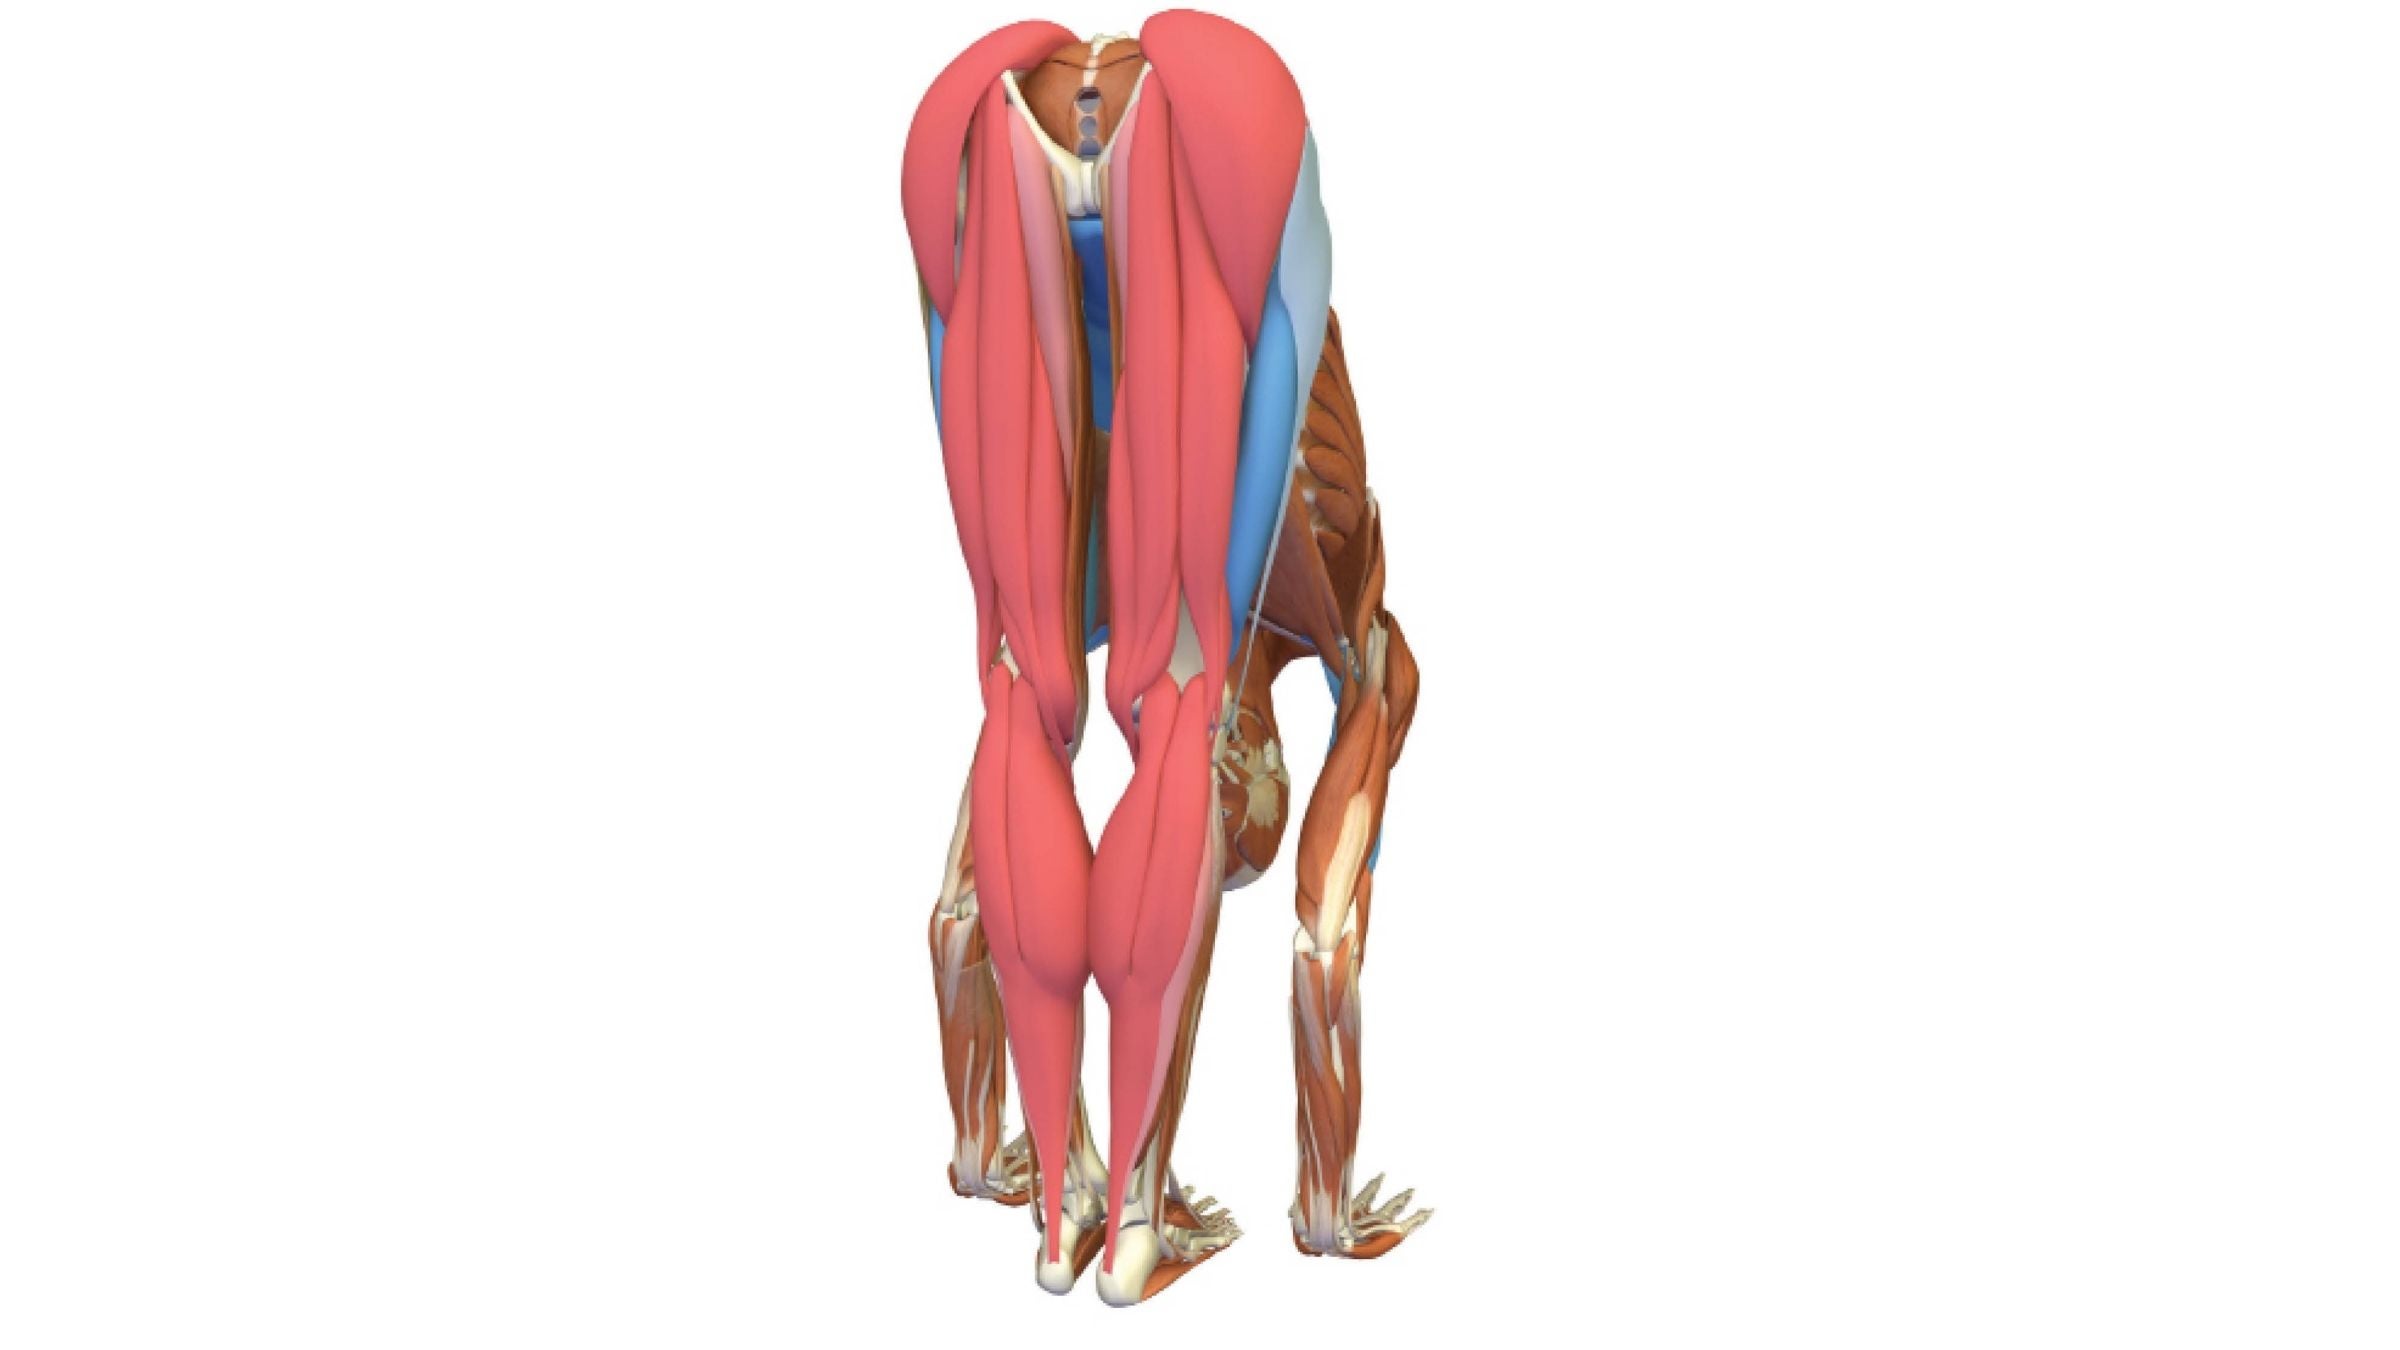 An anatomy illustration shows a person's body in Standing Forward Bend: Uttanasana